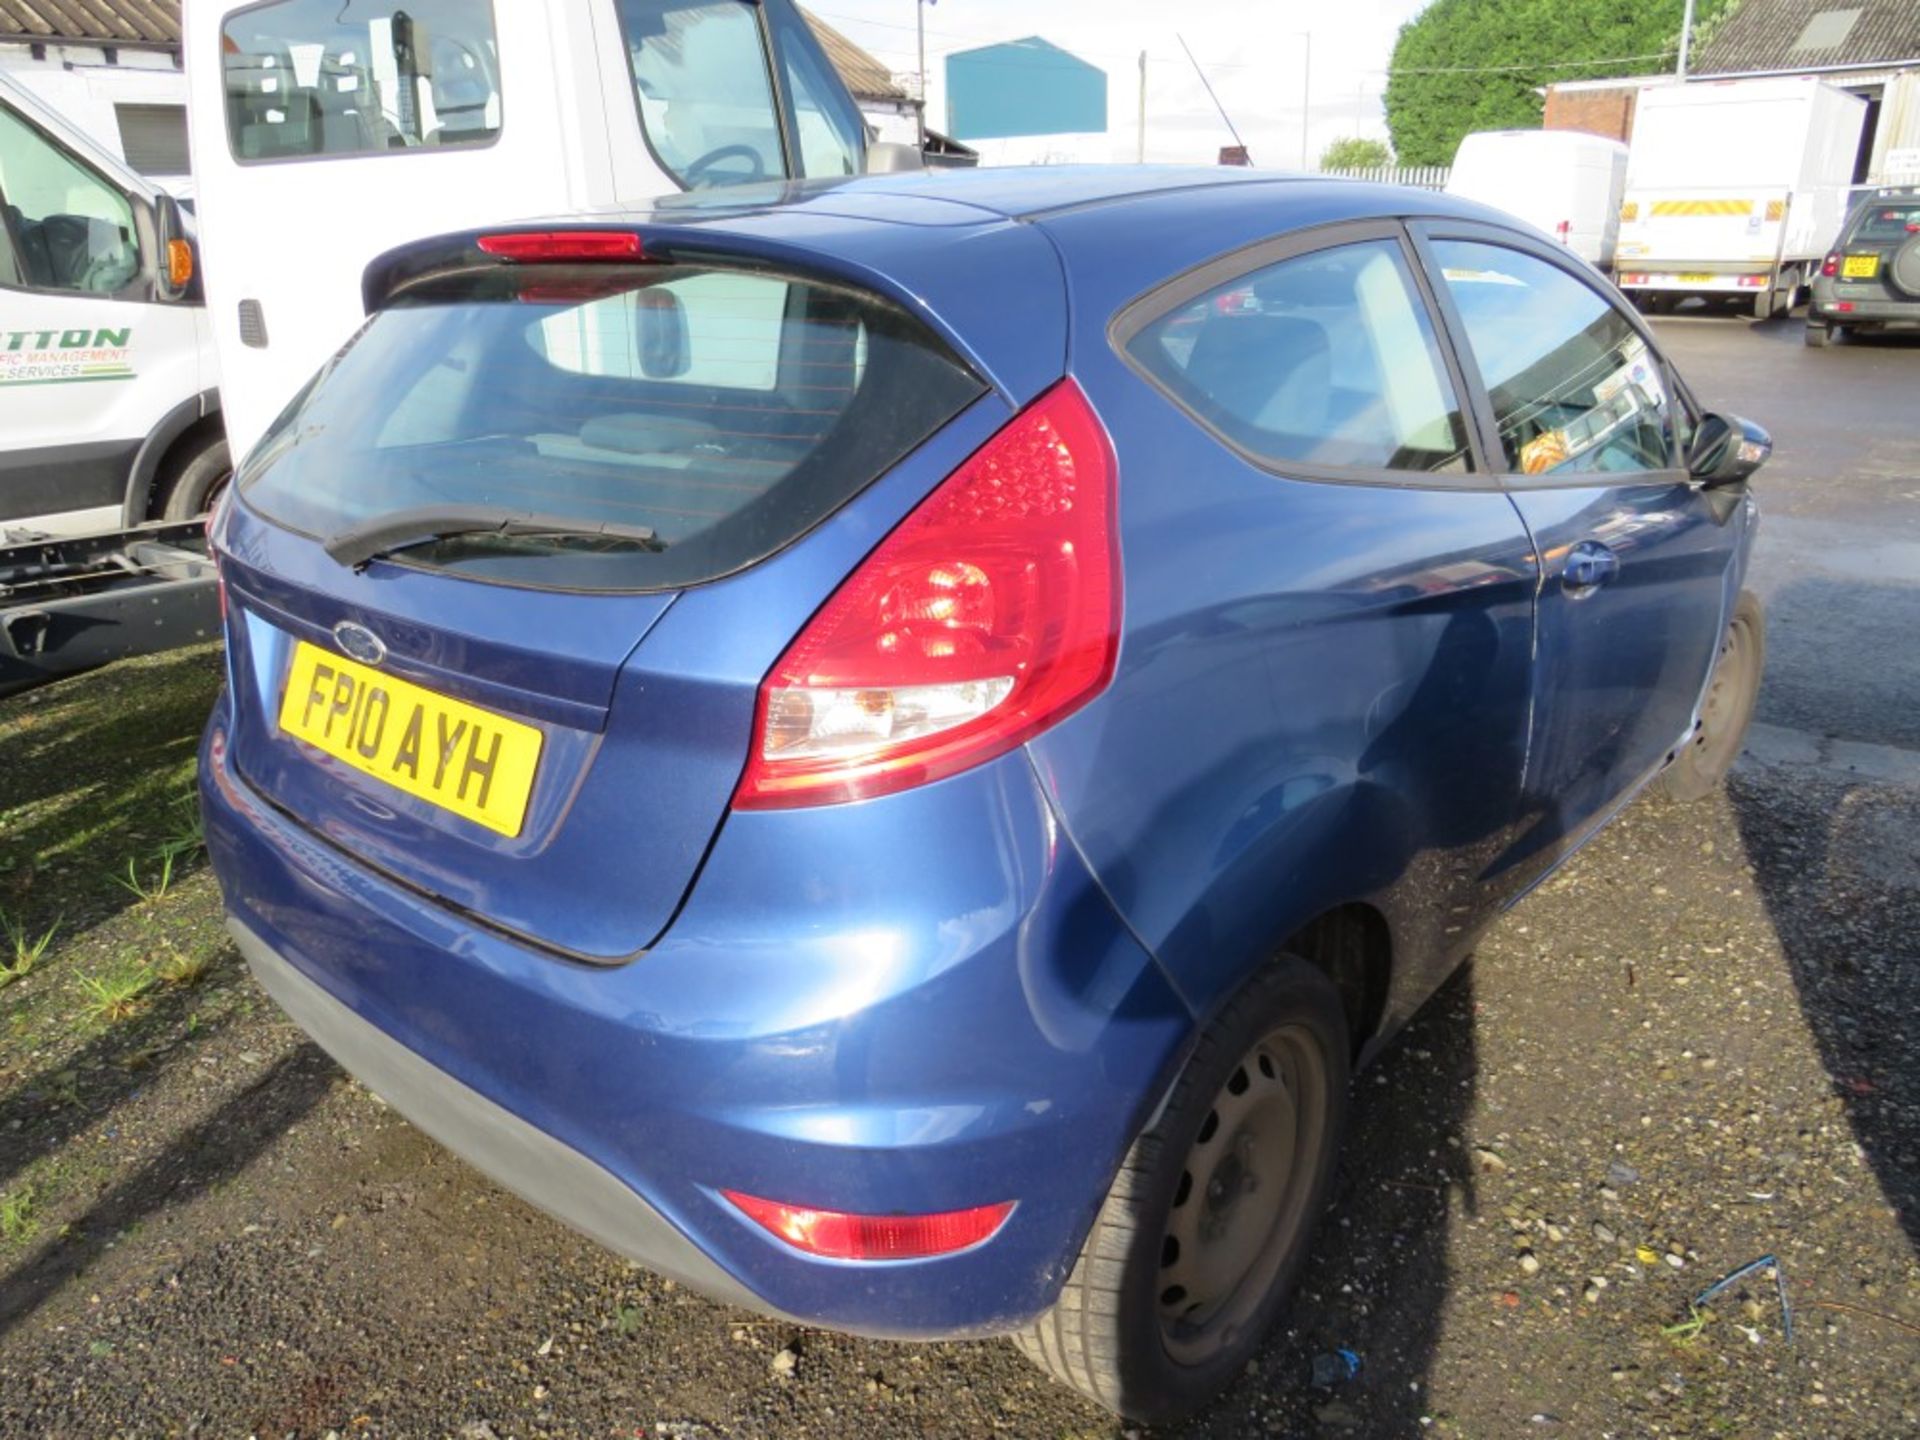 10 reg FORD FIESTA EDGE TDCI 68 3 DOOR HATCHBACK (ACCIDENT DAMAGED, RUNS BUT NOT FIT TO DRIVE) ( - Image 4 of 6